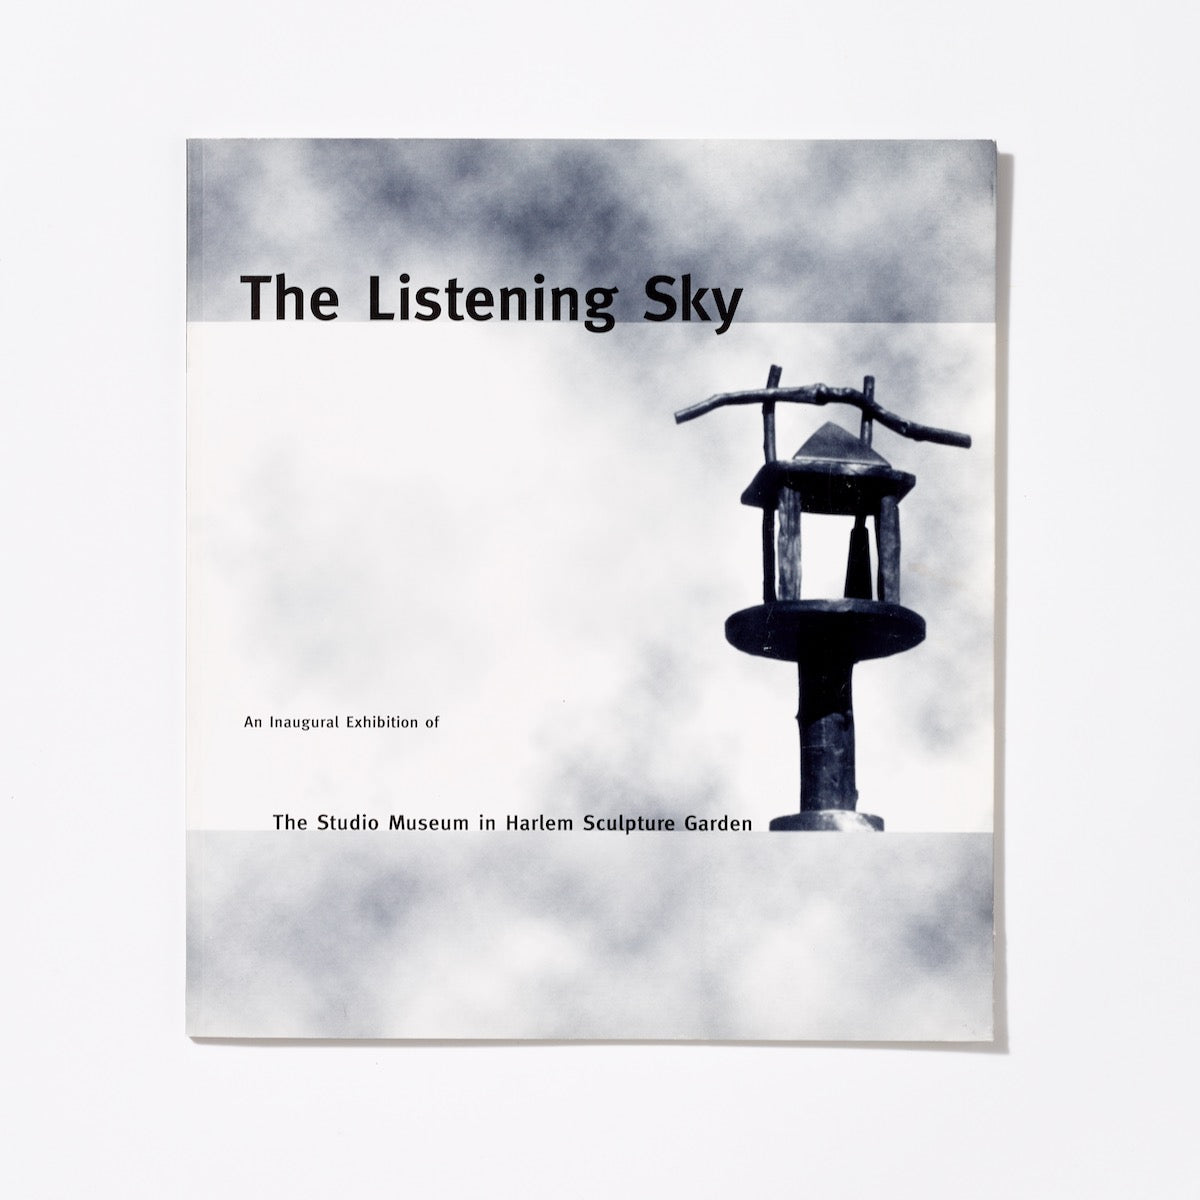 The Listening Sky: An Inaugural Exhibition of The Studio Museum in Harlem Sculpture Garden